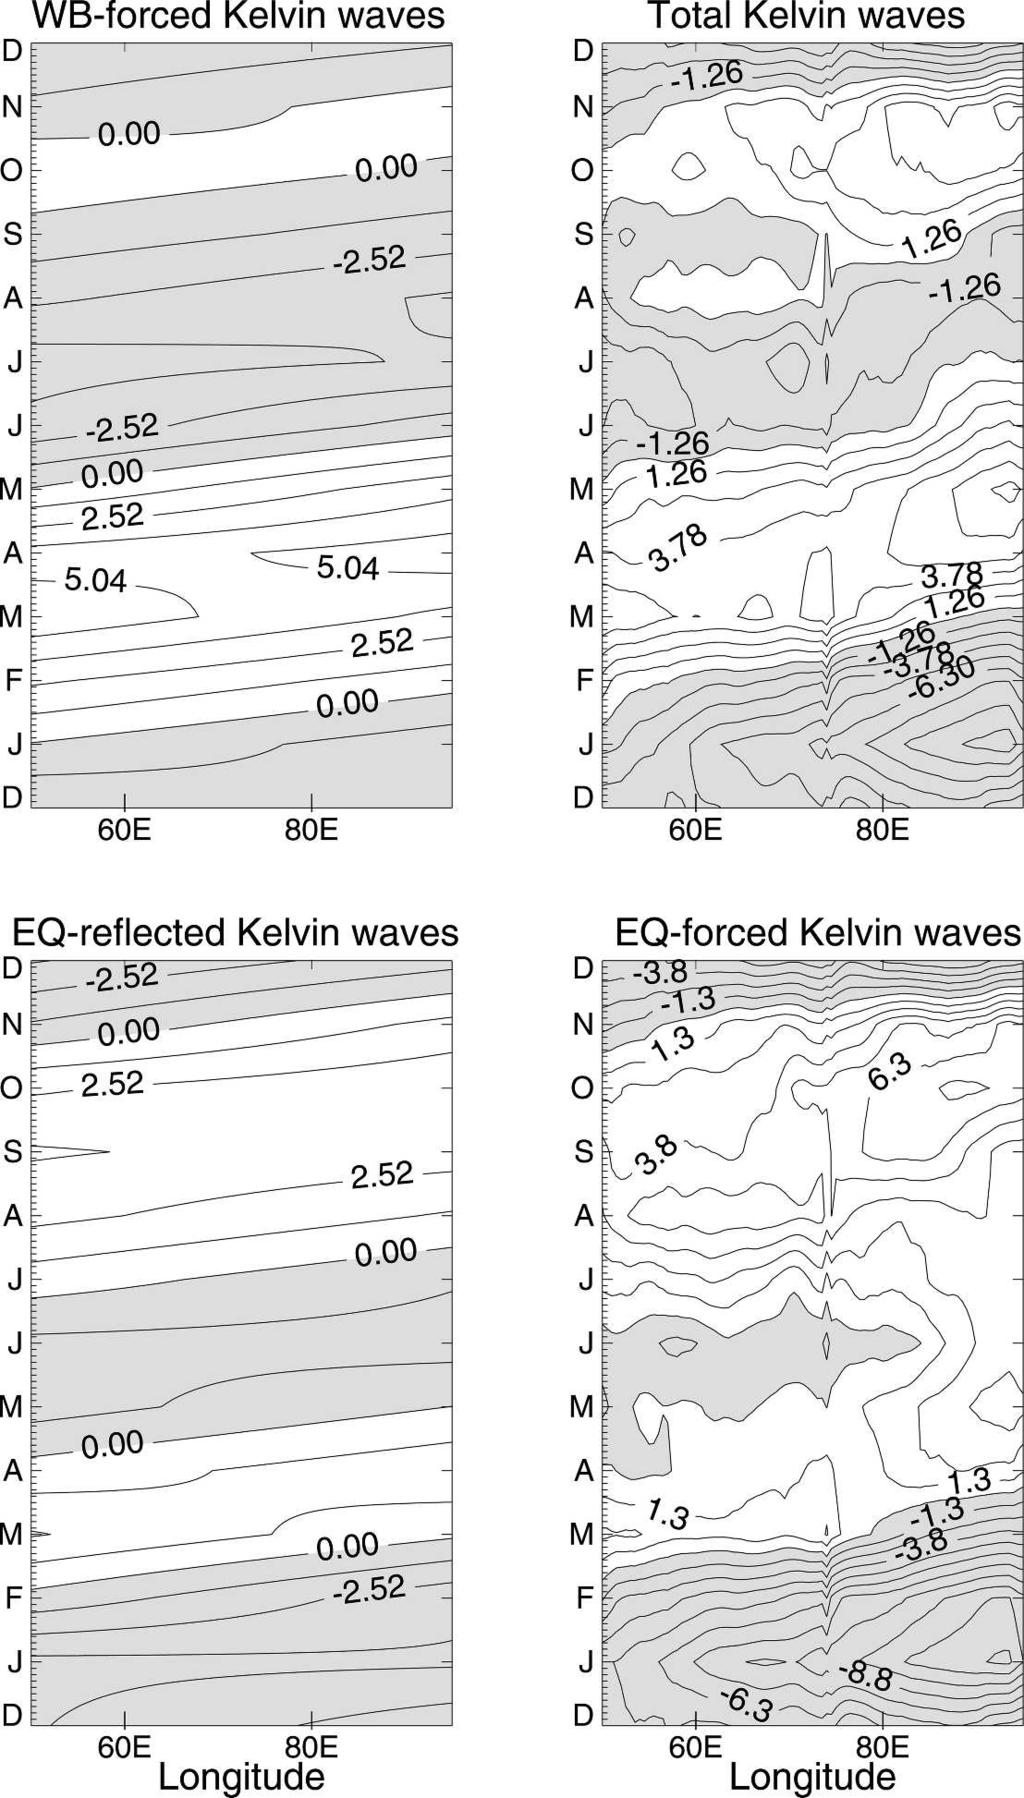 940 J O U R N A L O F P H Y S I C A L O C E A N O G R A P H Y VOLUME 36 Kelvin wave facilitates the dominance of the semiannual harmonic in the total sea level oscillation in the western basin.